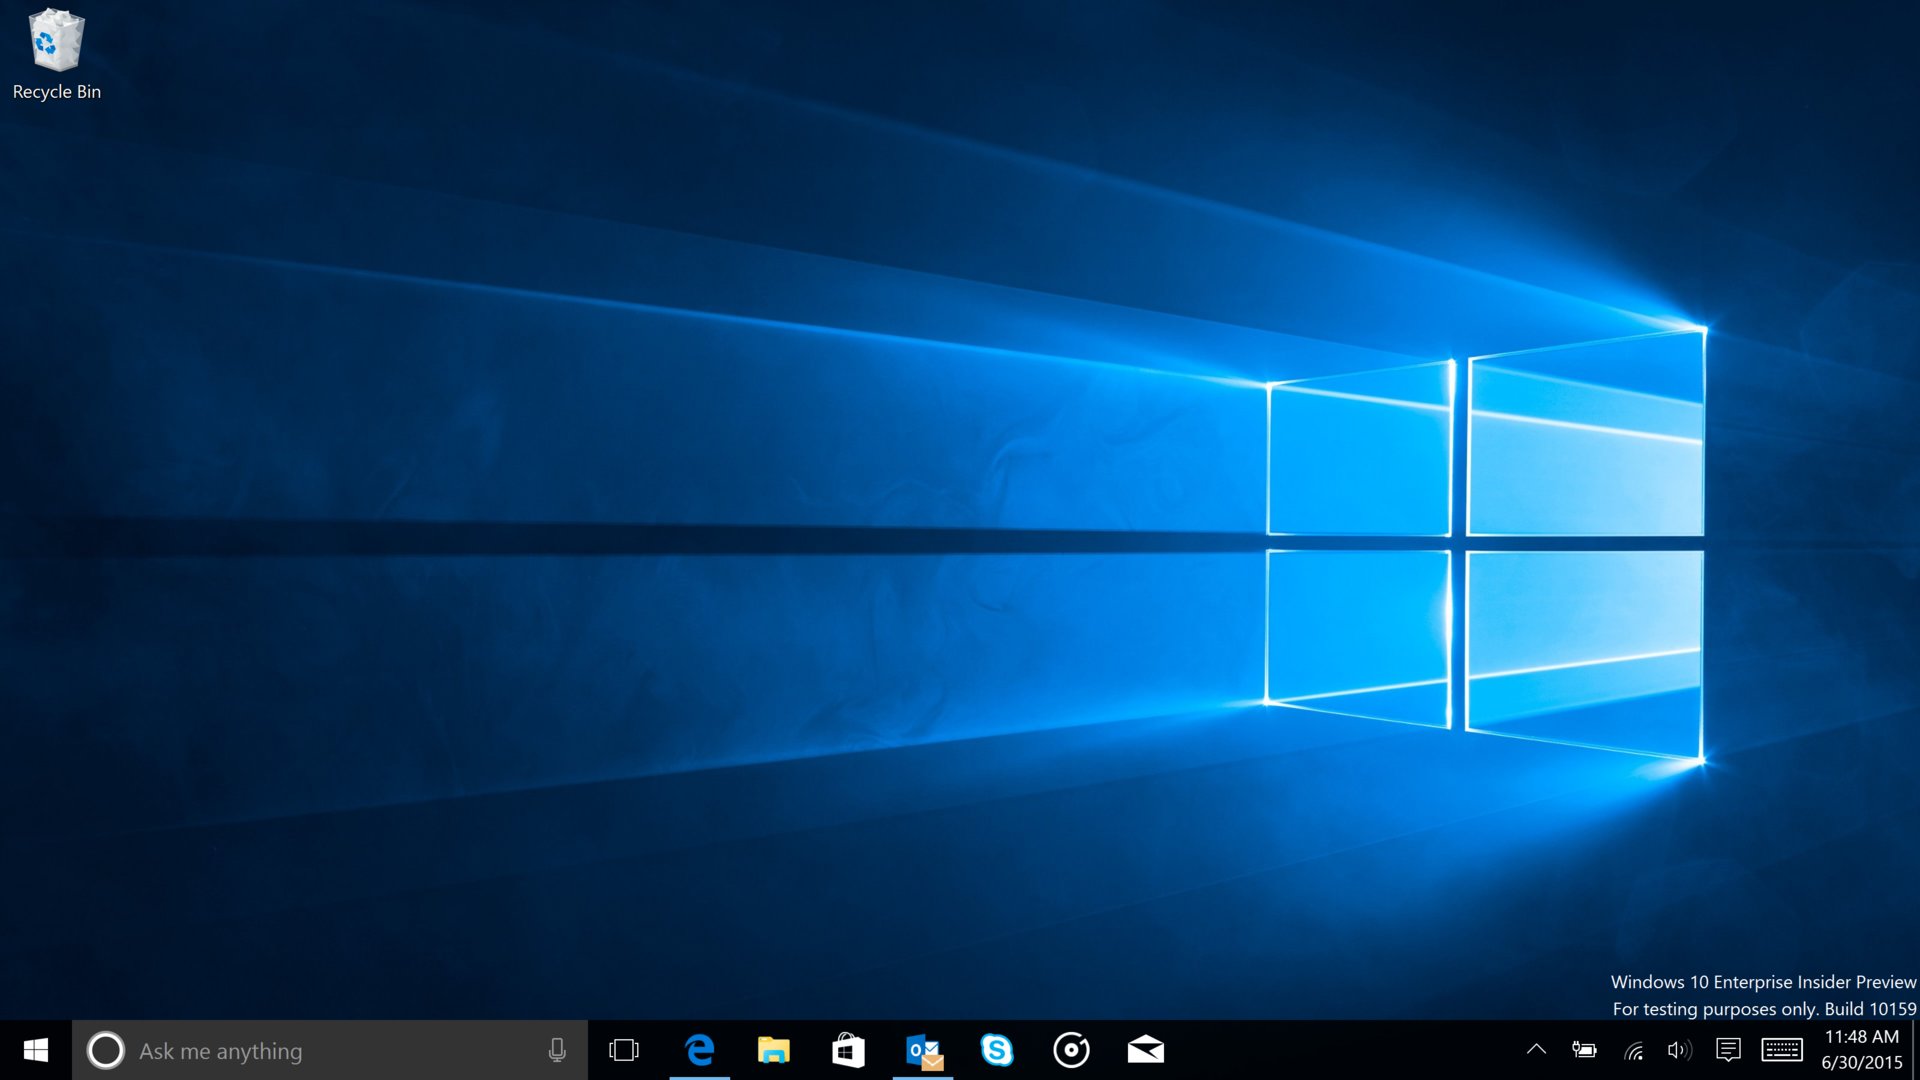 Windows 10 Insider Preview Build 10159